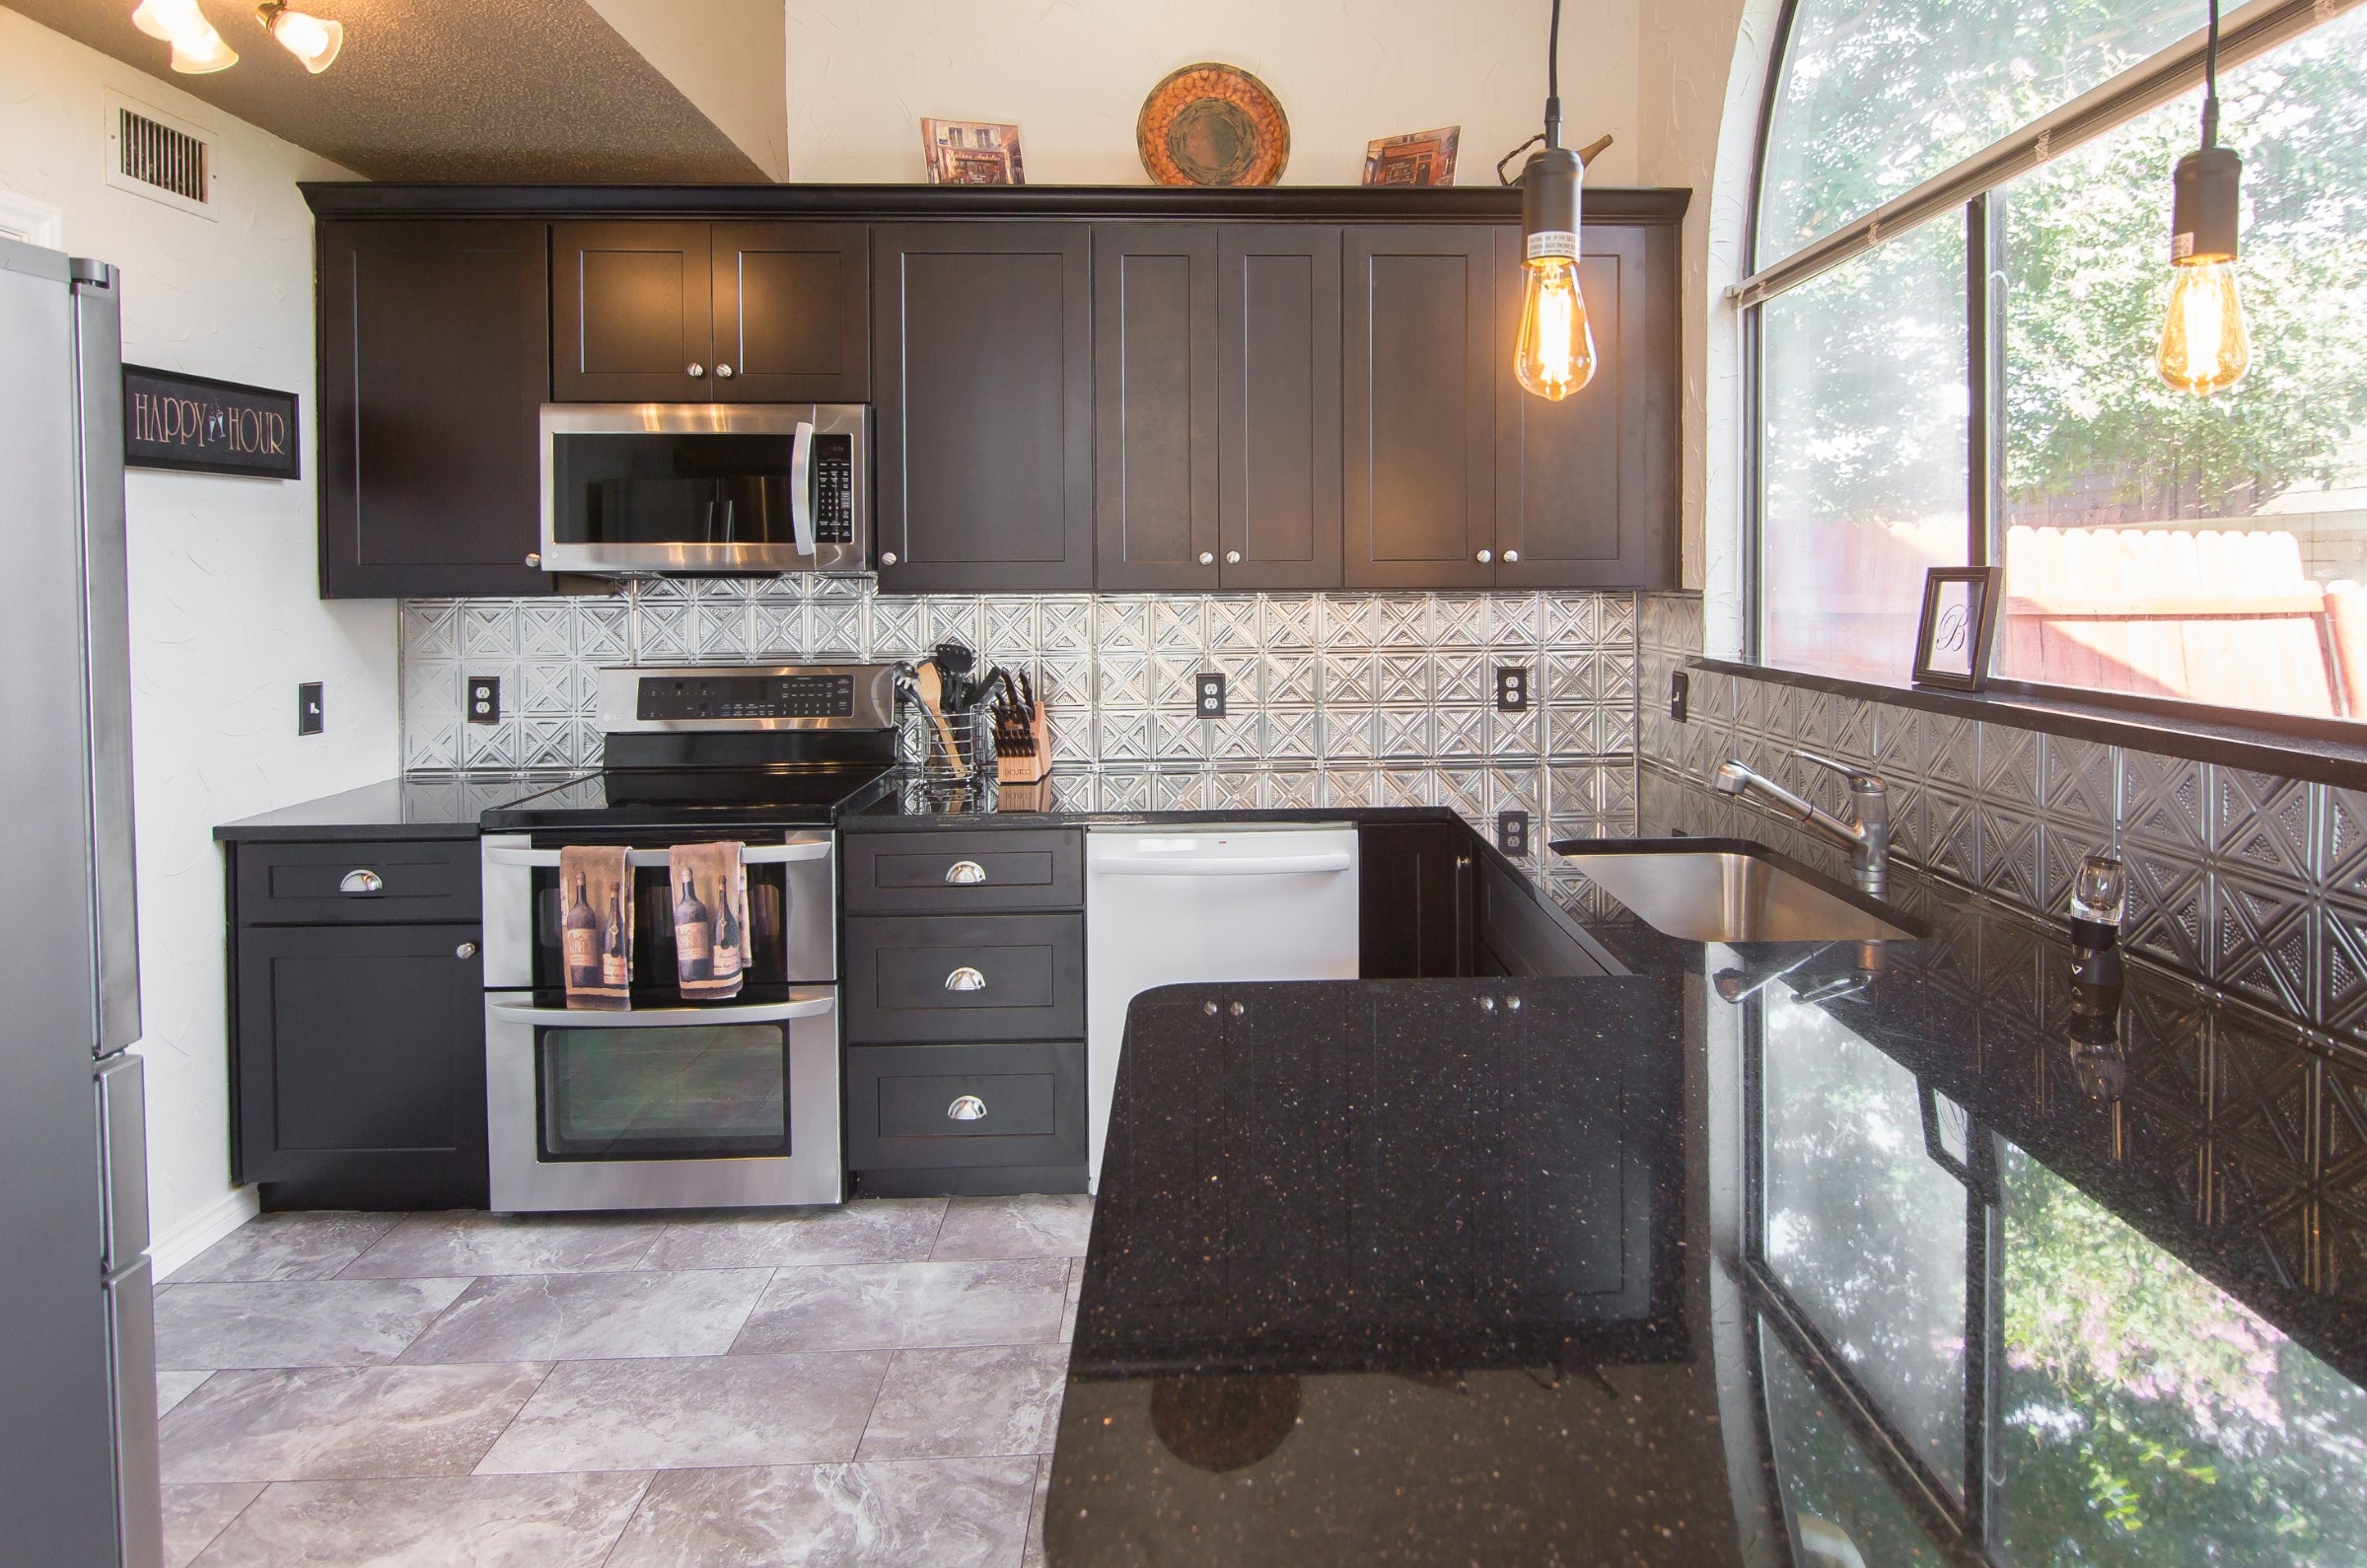 Kitchen in silver and black with tin tile on the backsplash.